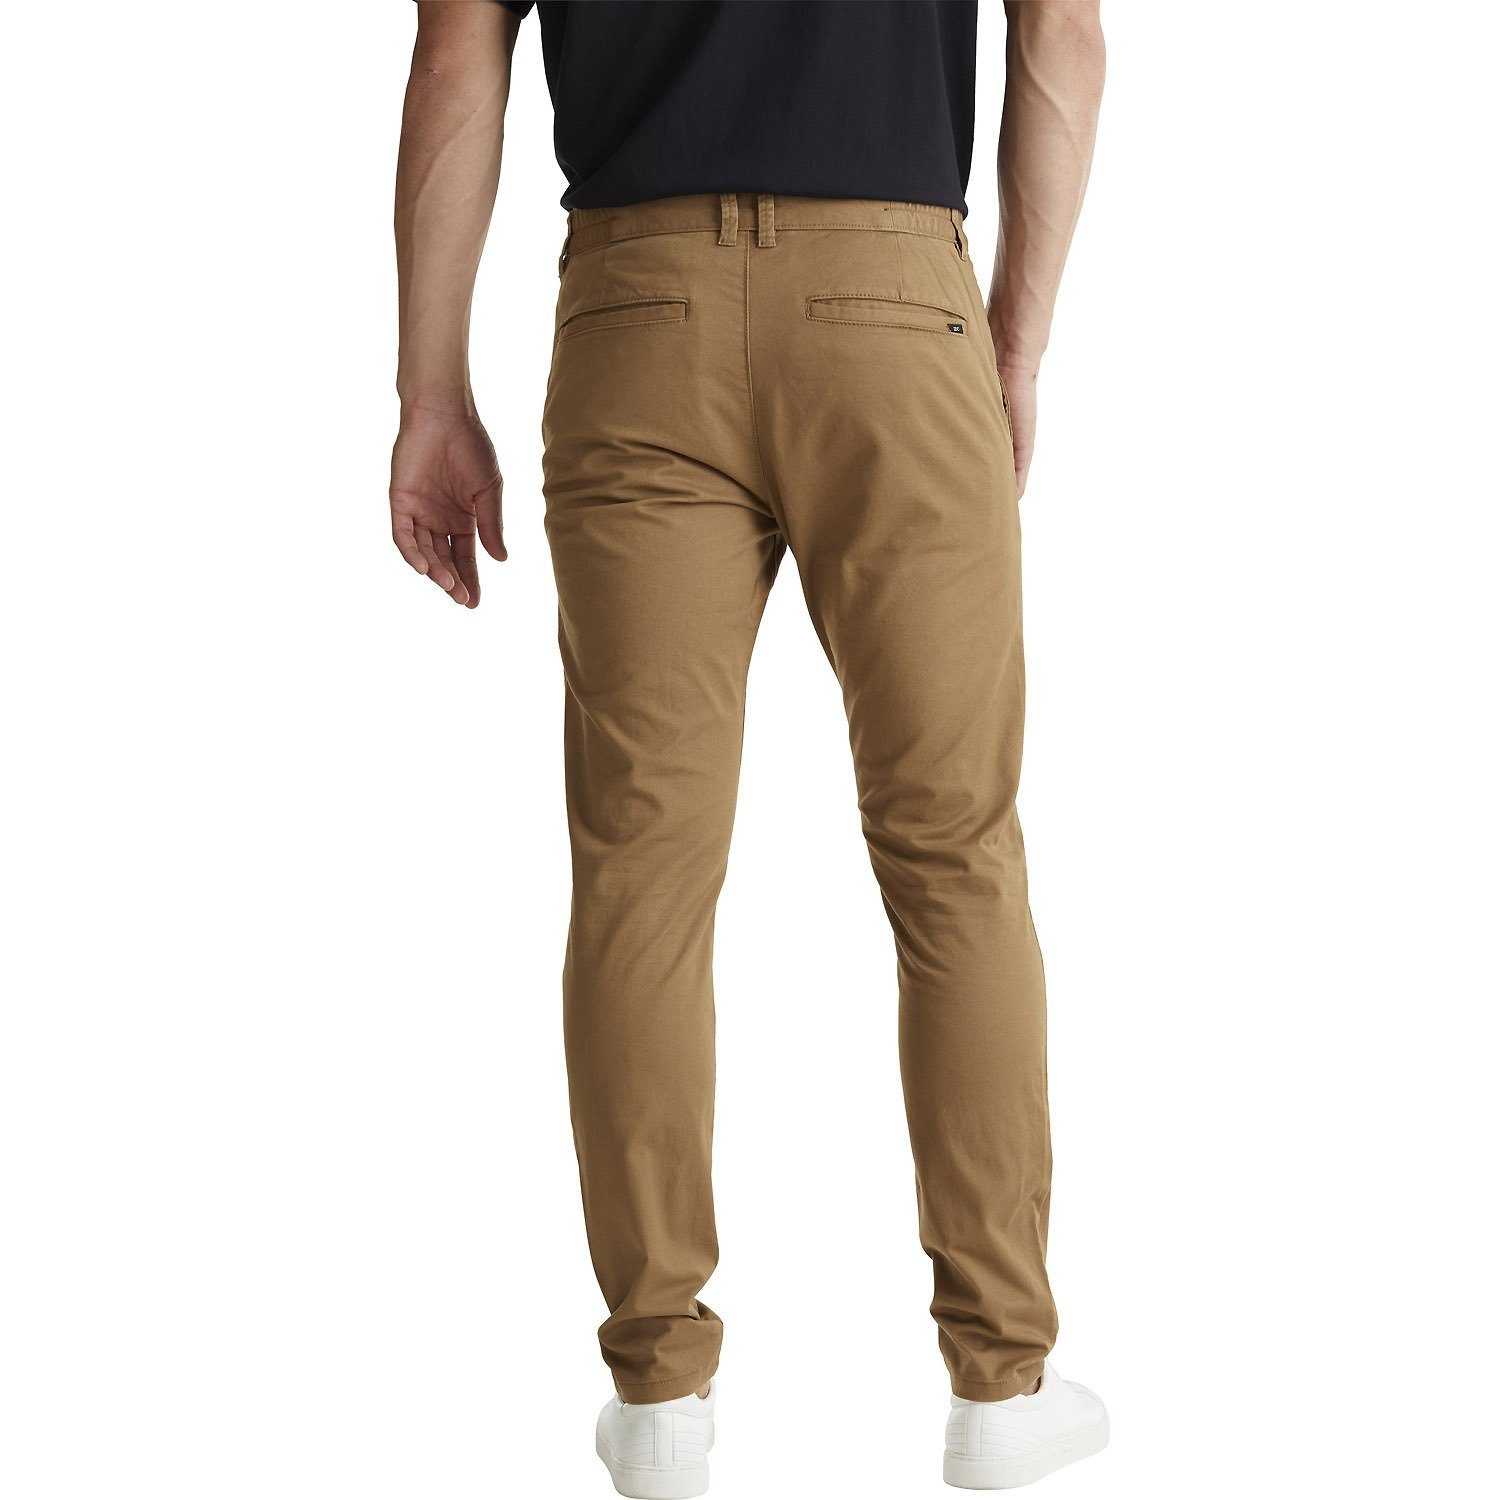 Chinostyle Hose edc Esprit by Outdoorhose